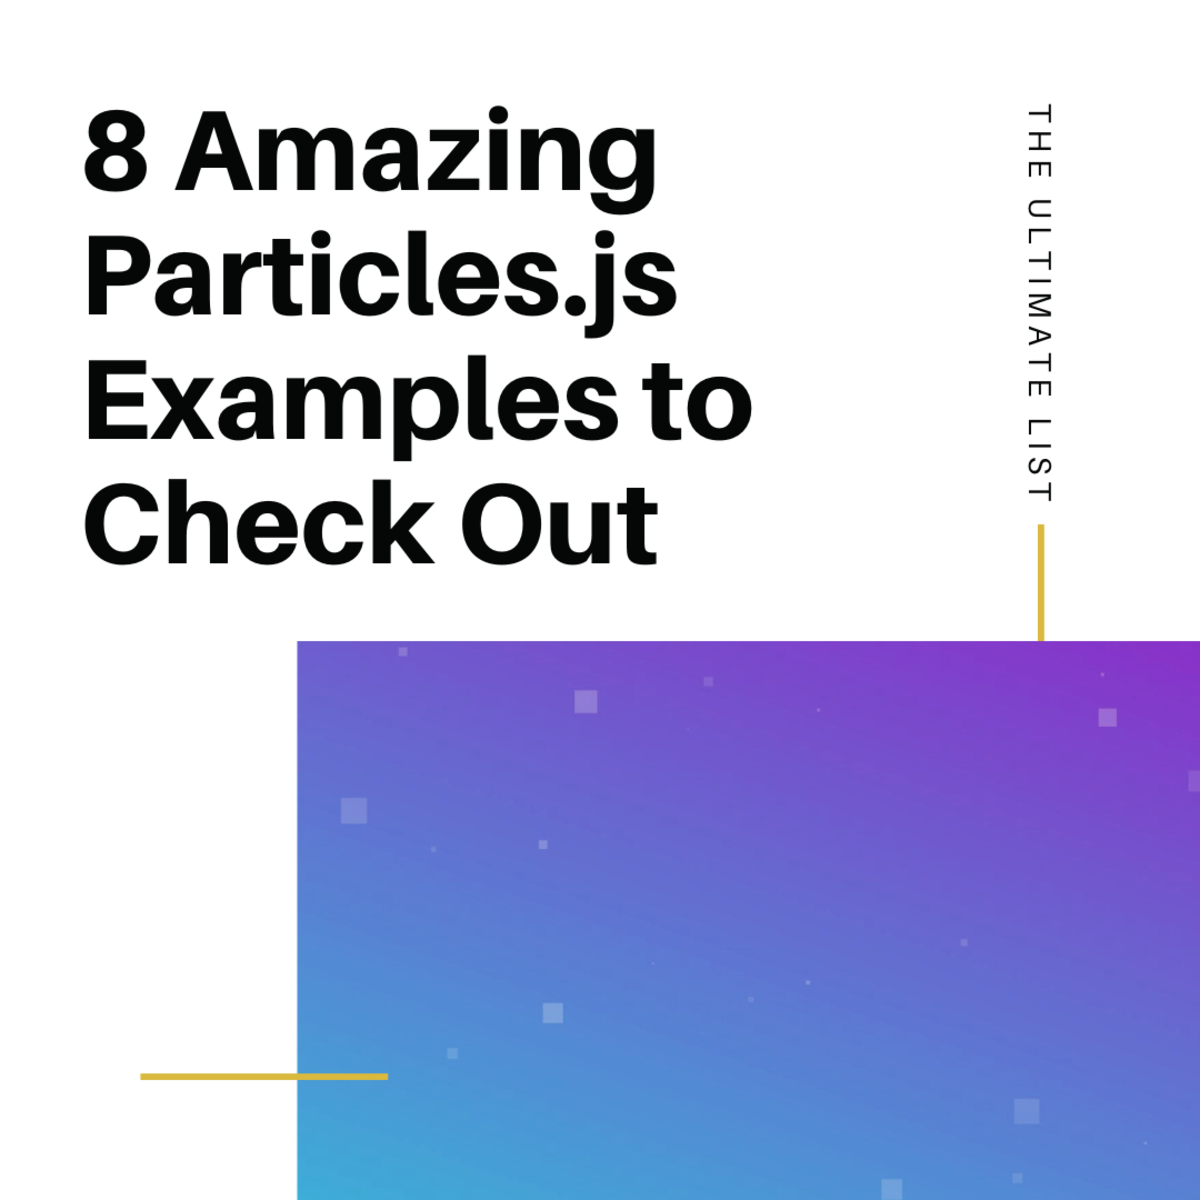 Discover some of the best Particles.js examples out there in this ultimate list!